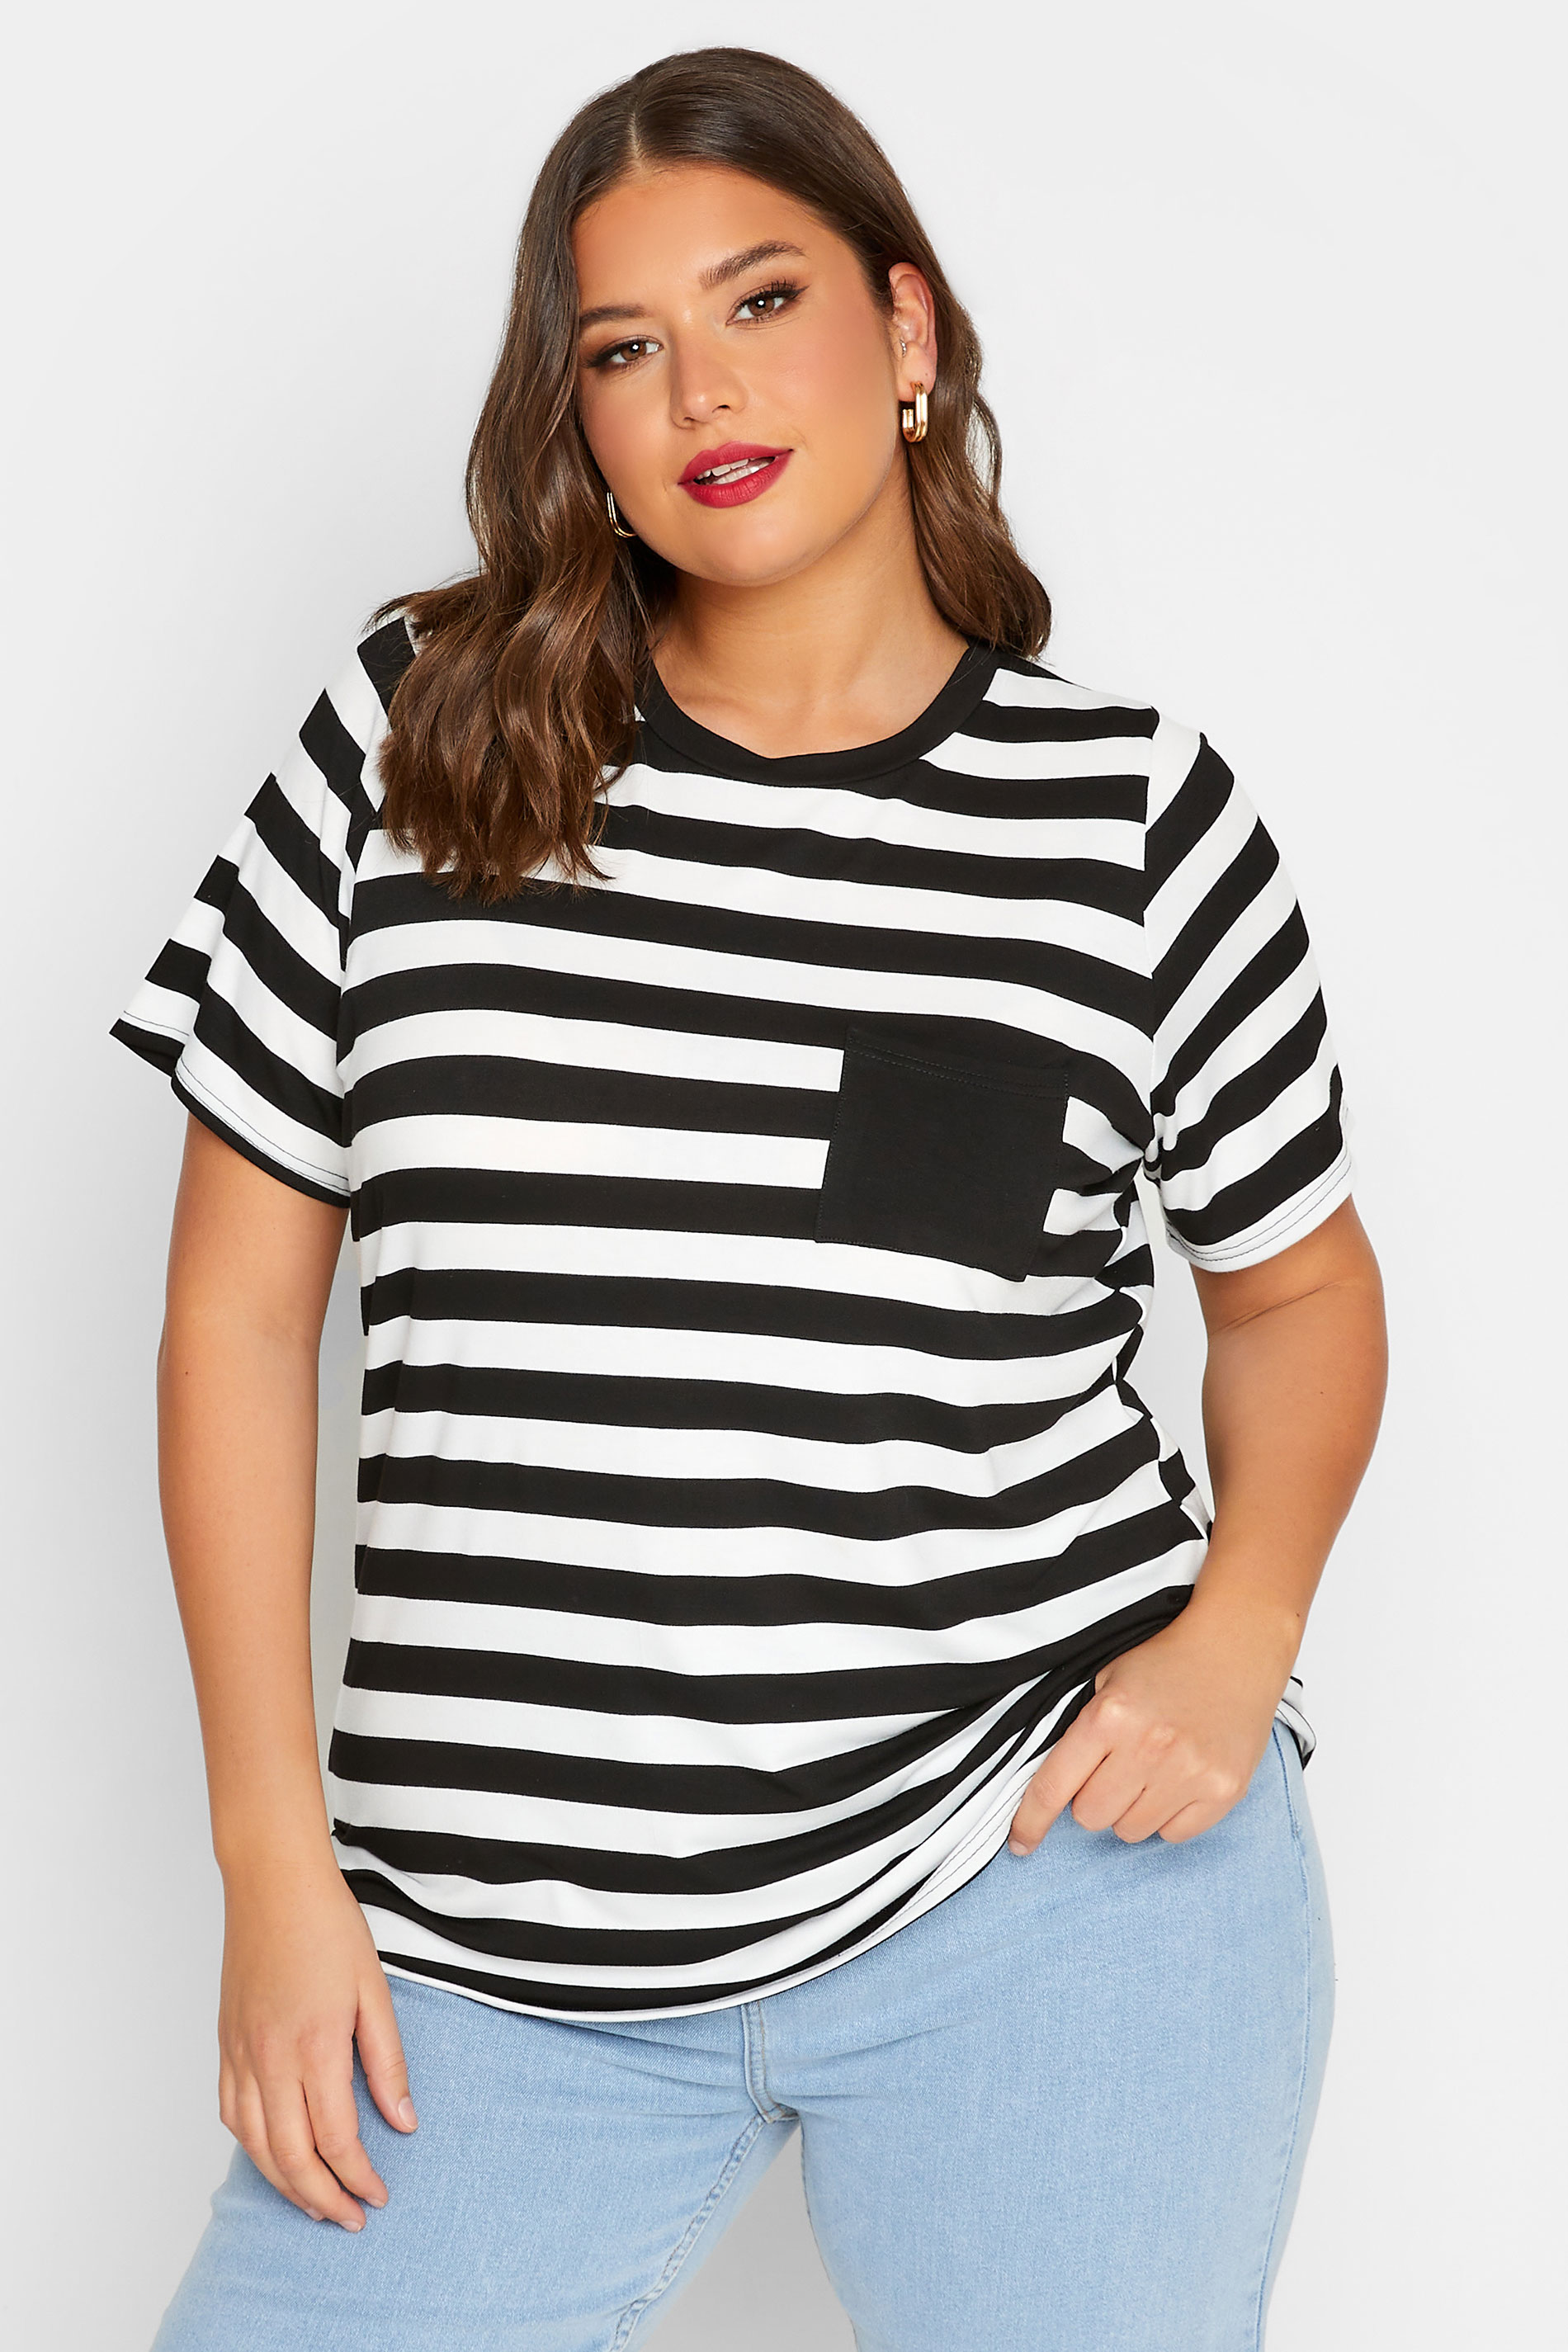 LIMITED COLLECTION Curve Plus Size Black Stripe Contrast Collar Stripe T-Shirt | Yours Clothing  1